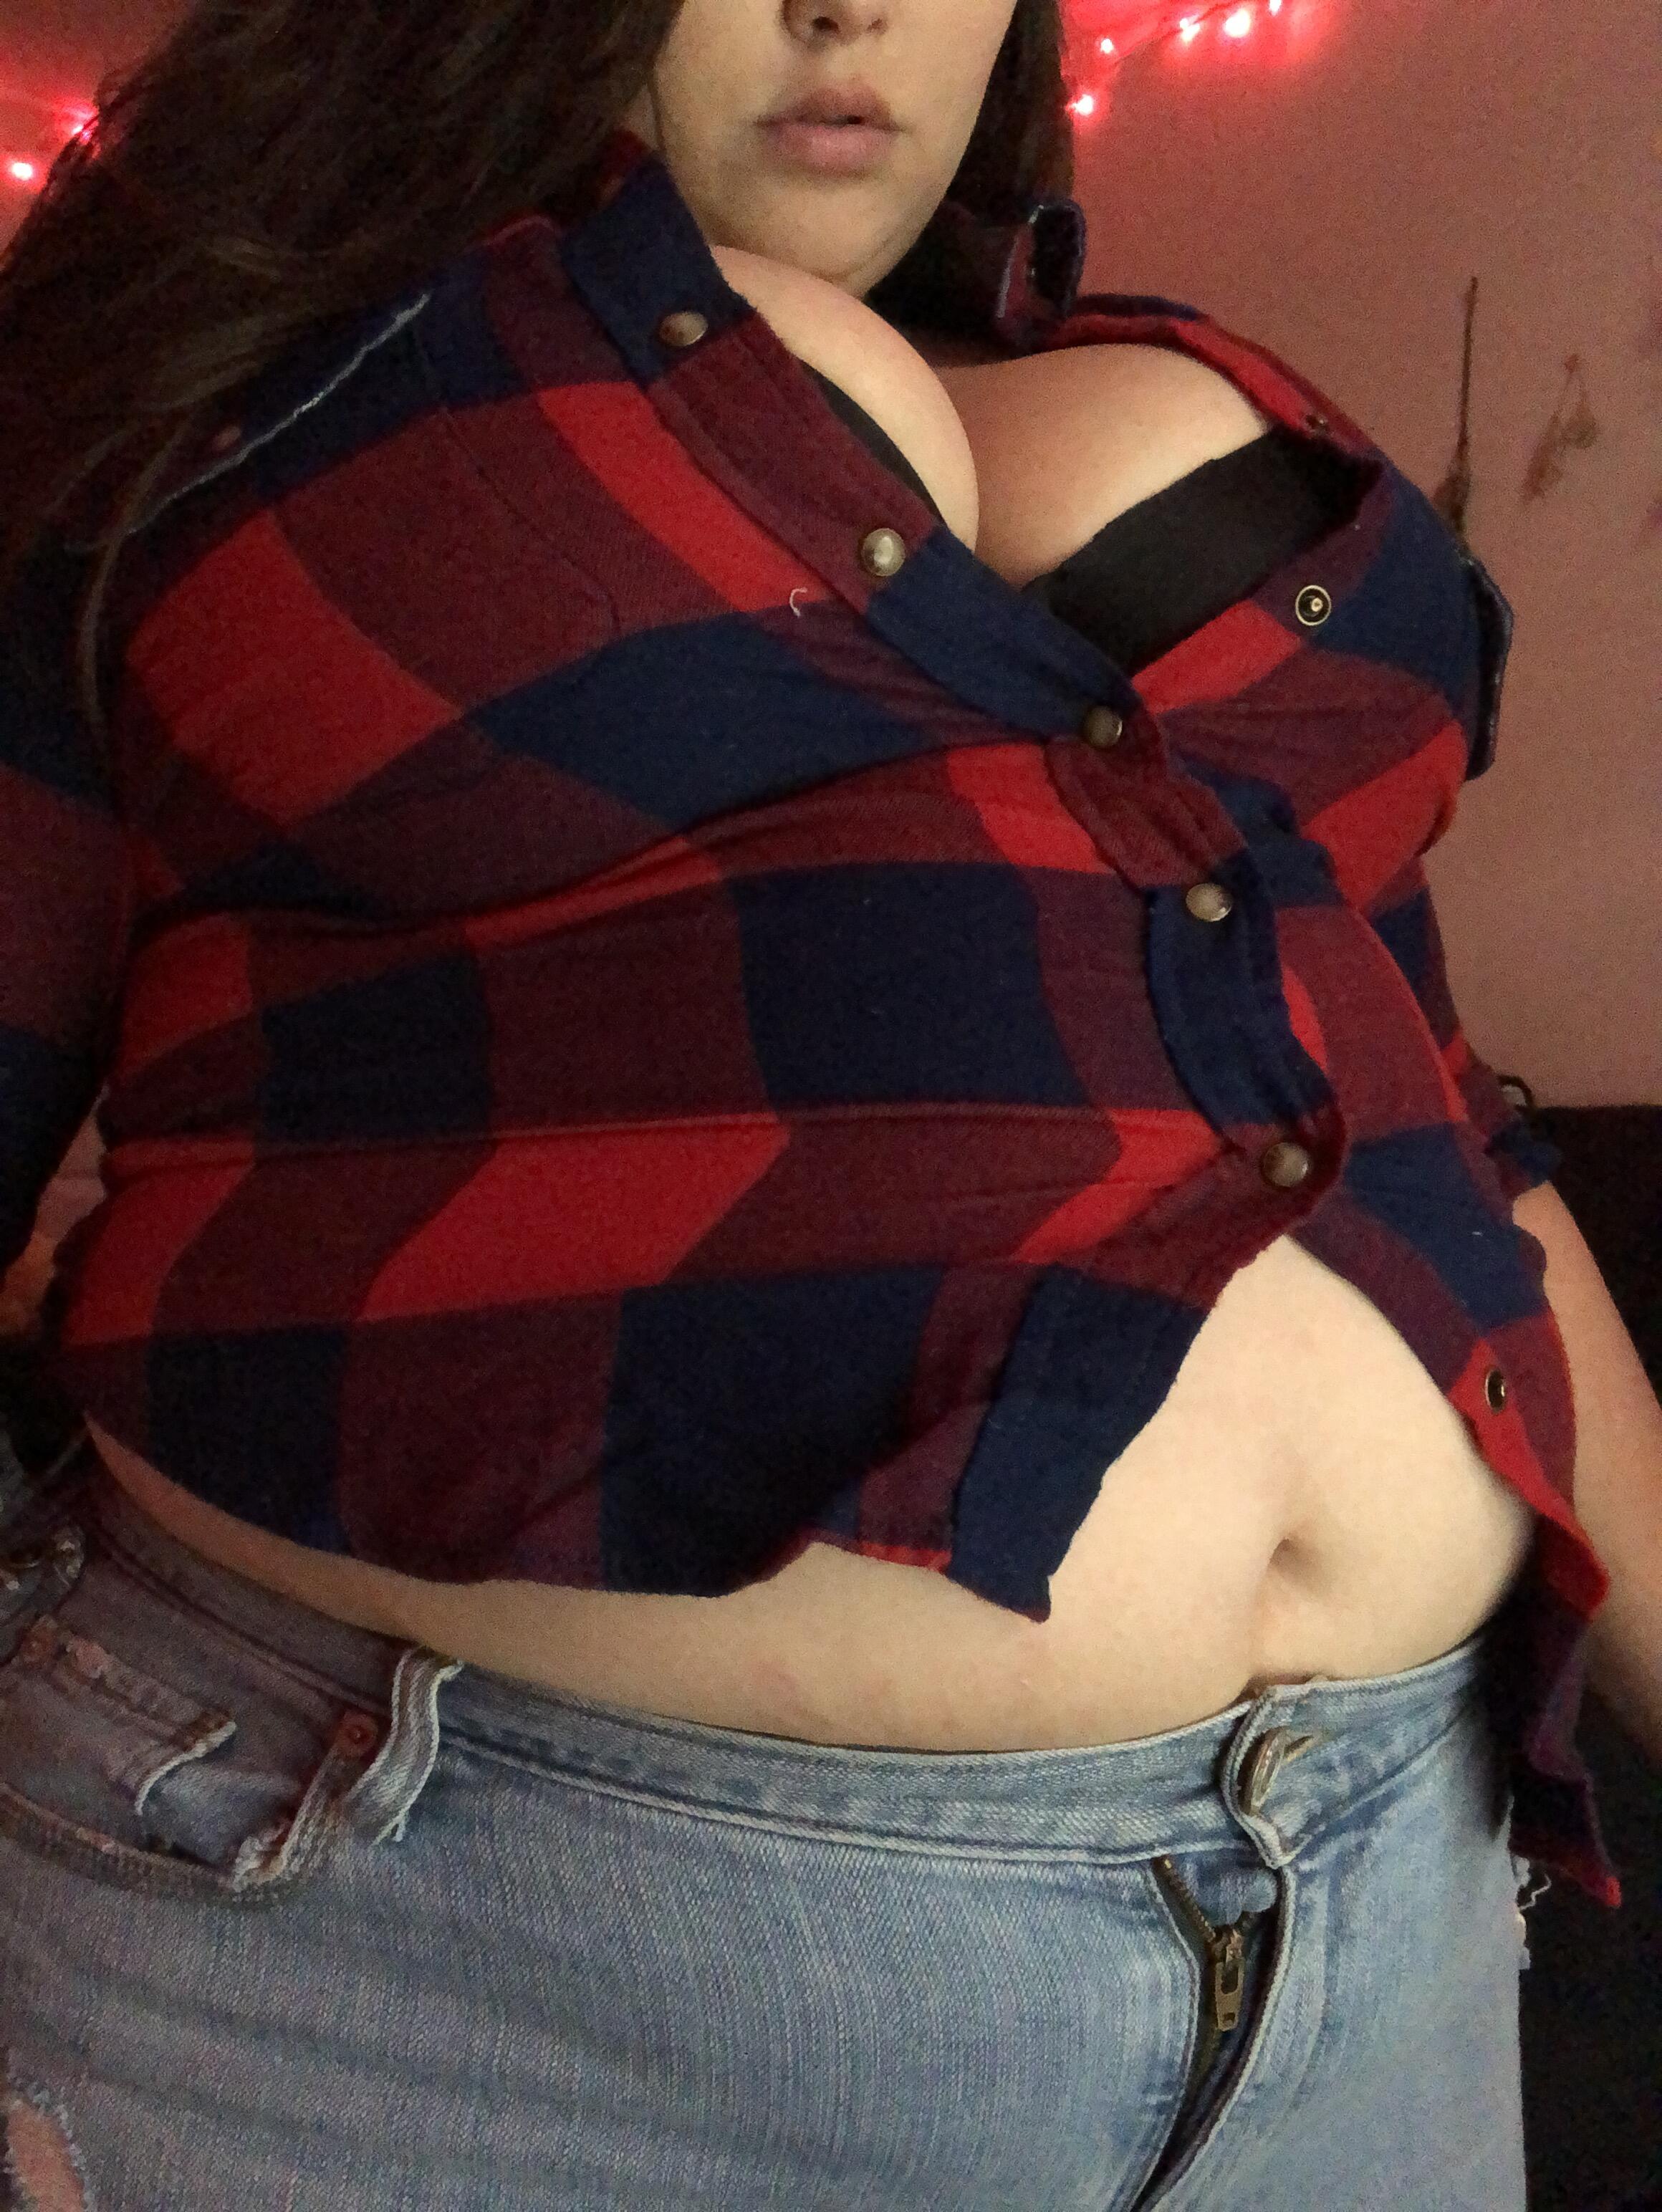 Chubby Small Tit Jeans - Chubby Belly Tight Clothes - Free Sex Photos, Best Porn Images and Hot XXX  Pics on www.melodyporn.com